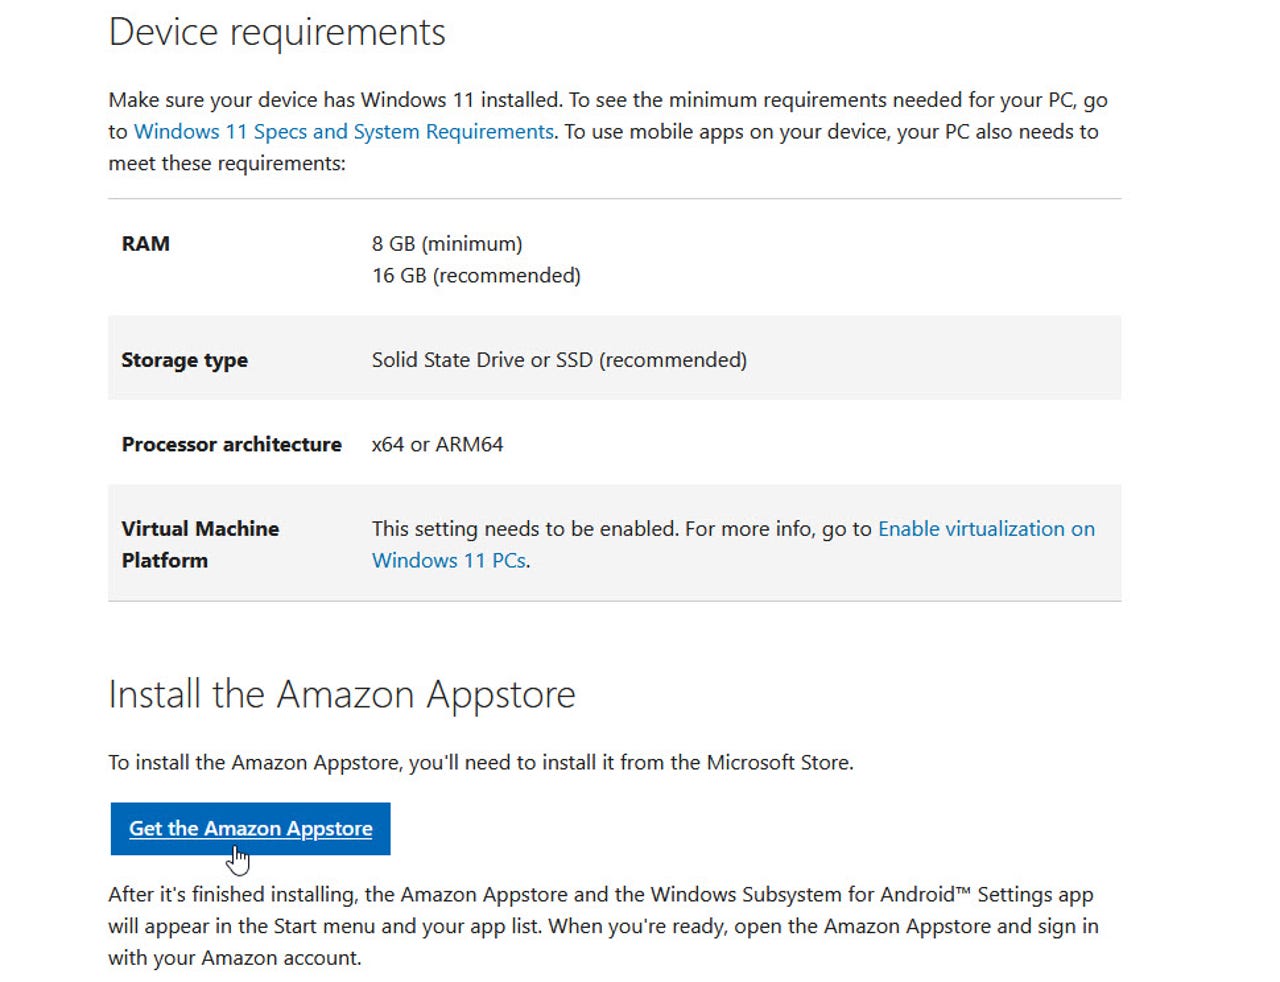 Install Amazon Appstore and Windows Subsystem for Android